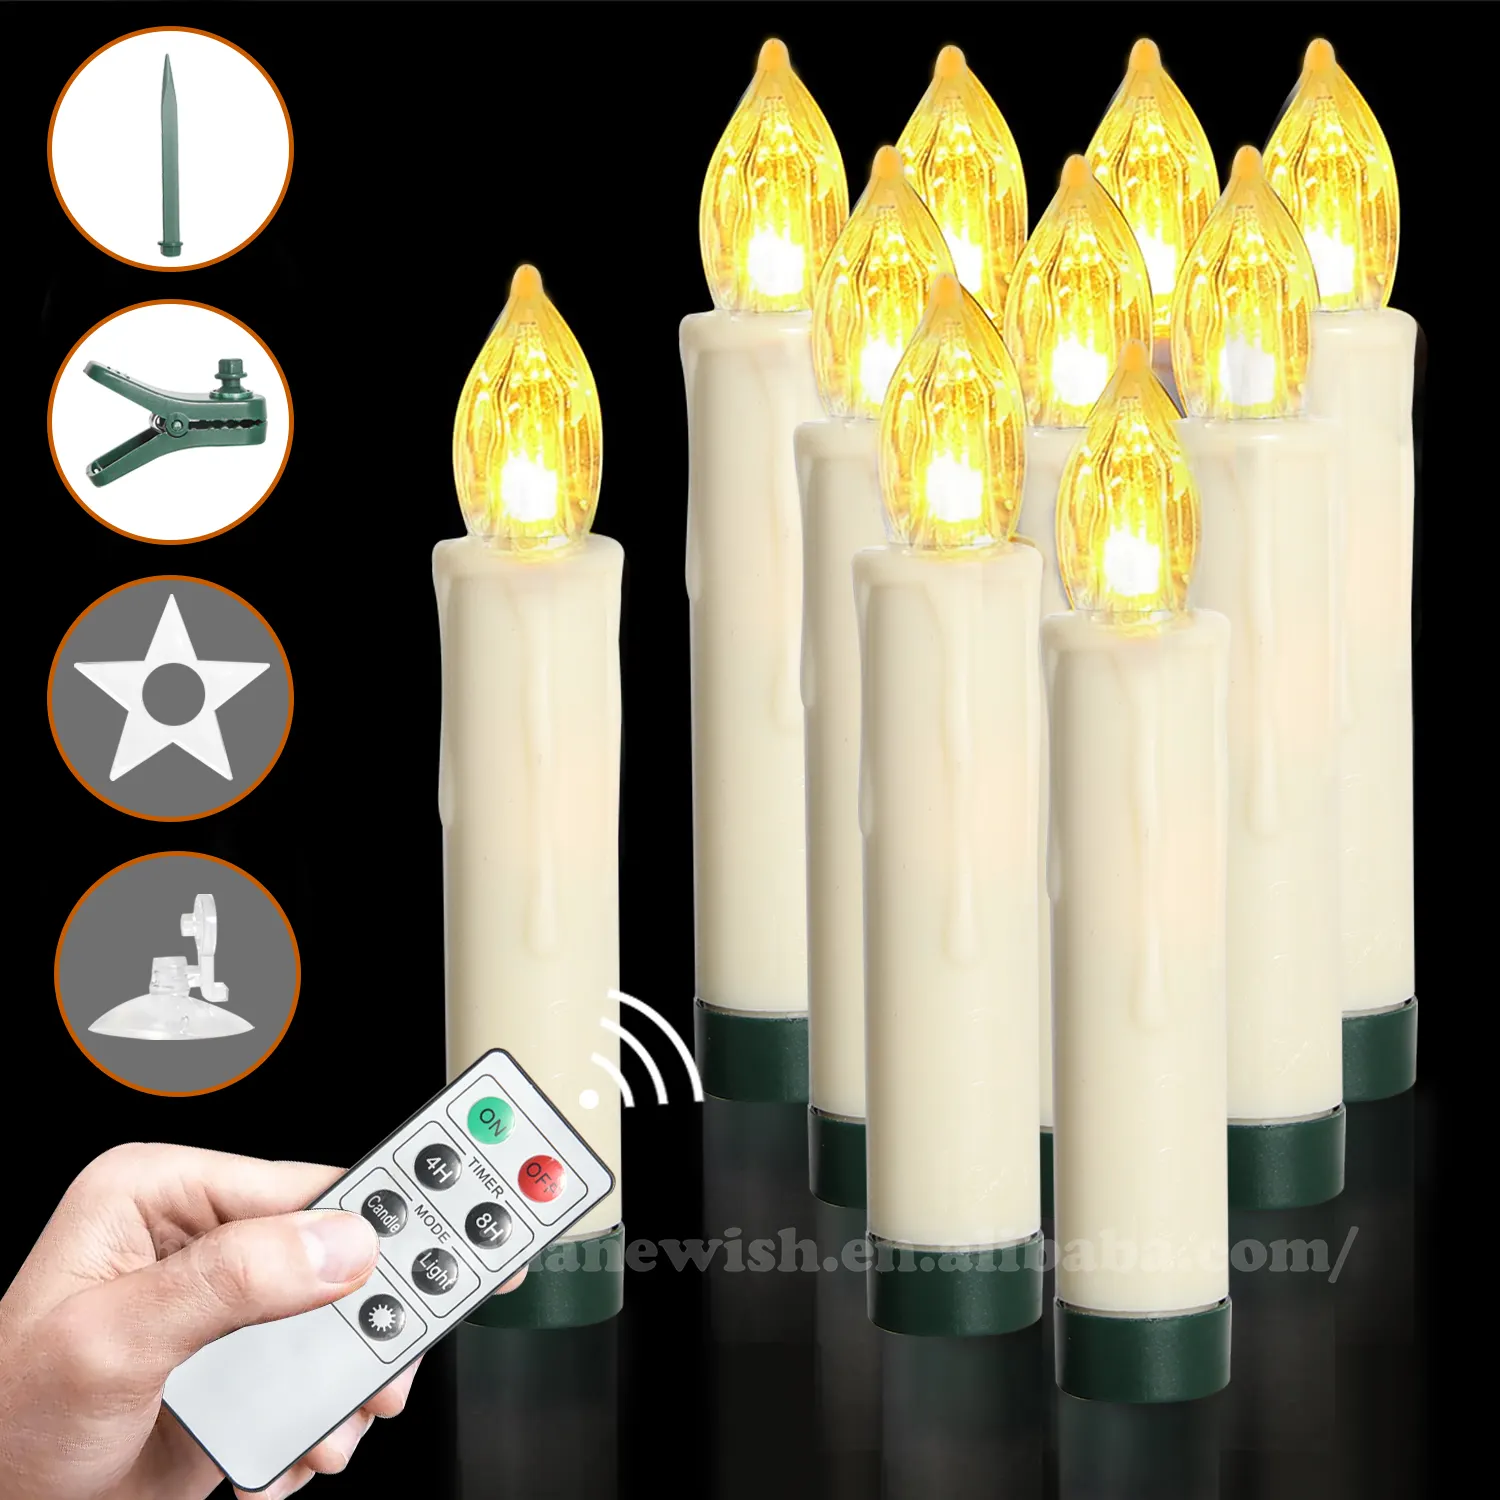 Kanlong Christmas Detachable10Pcs/Set Plastic LED Candles Hanging Taper Shape Candle Lights with Remote Control for Party Decors